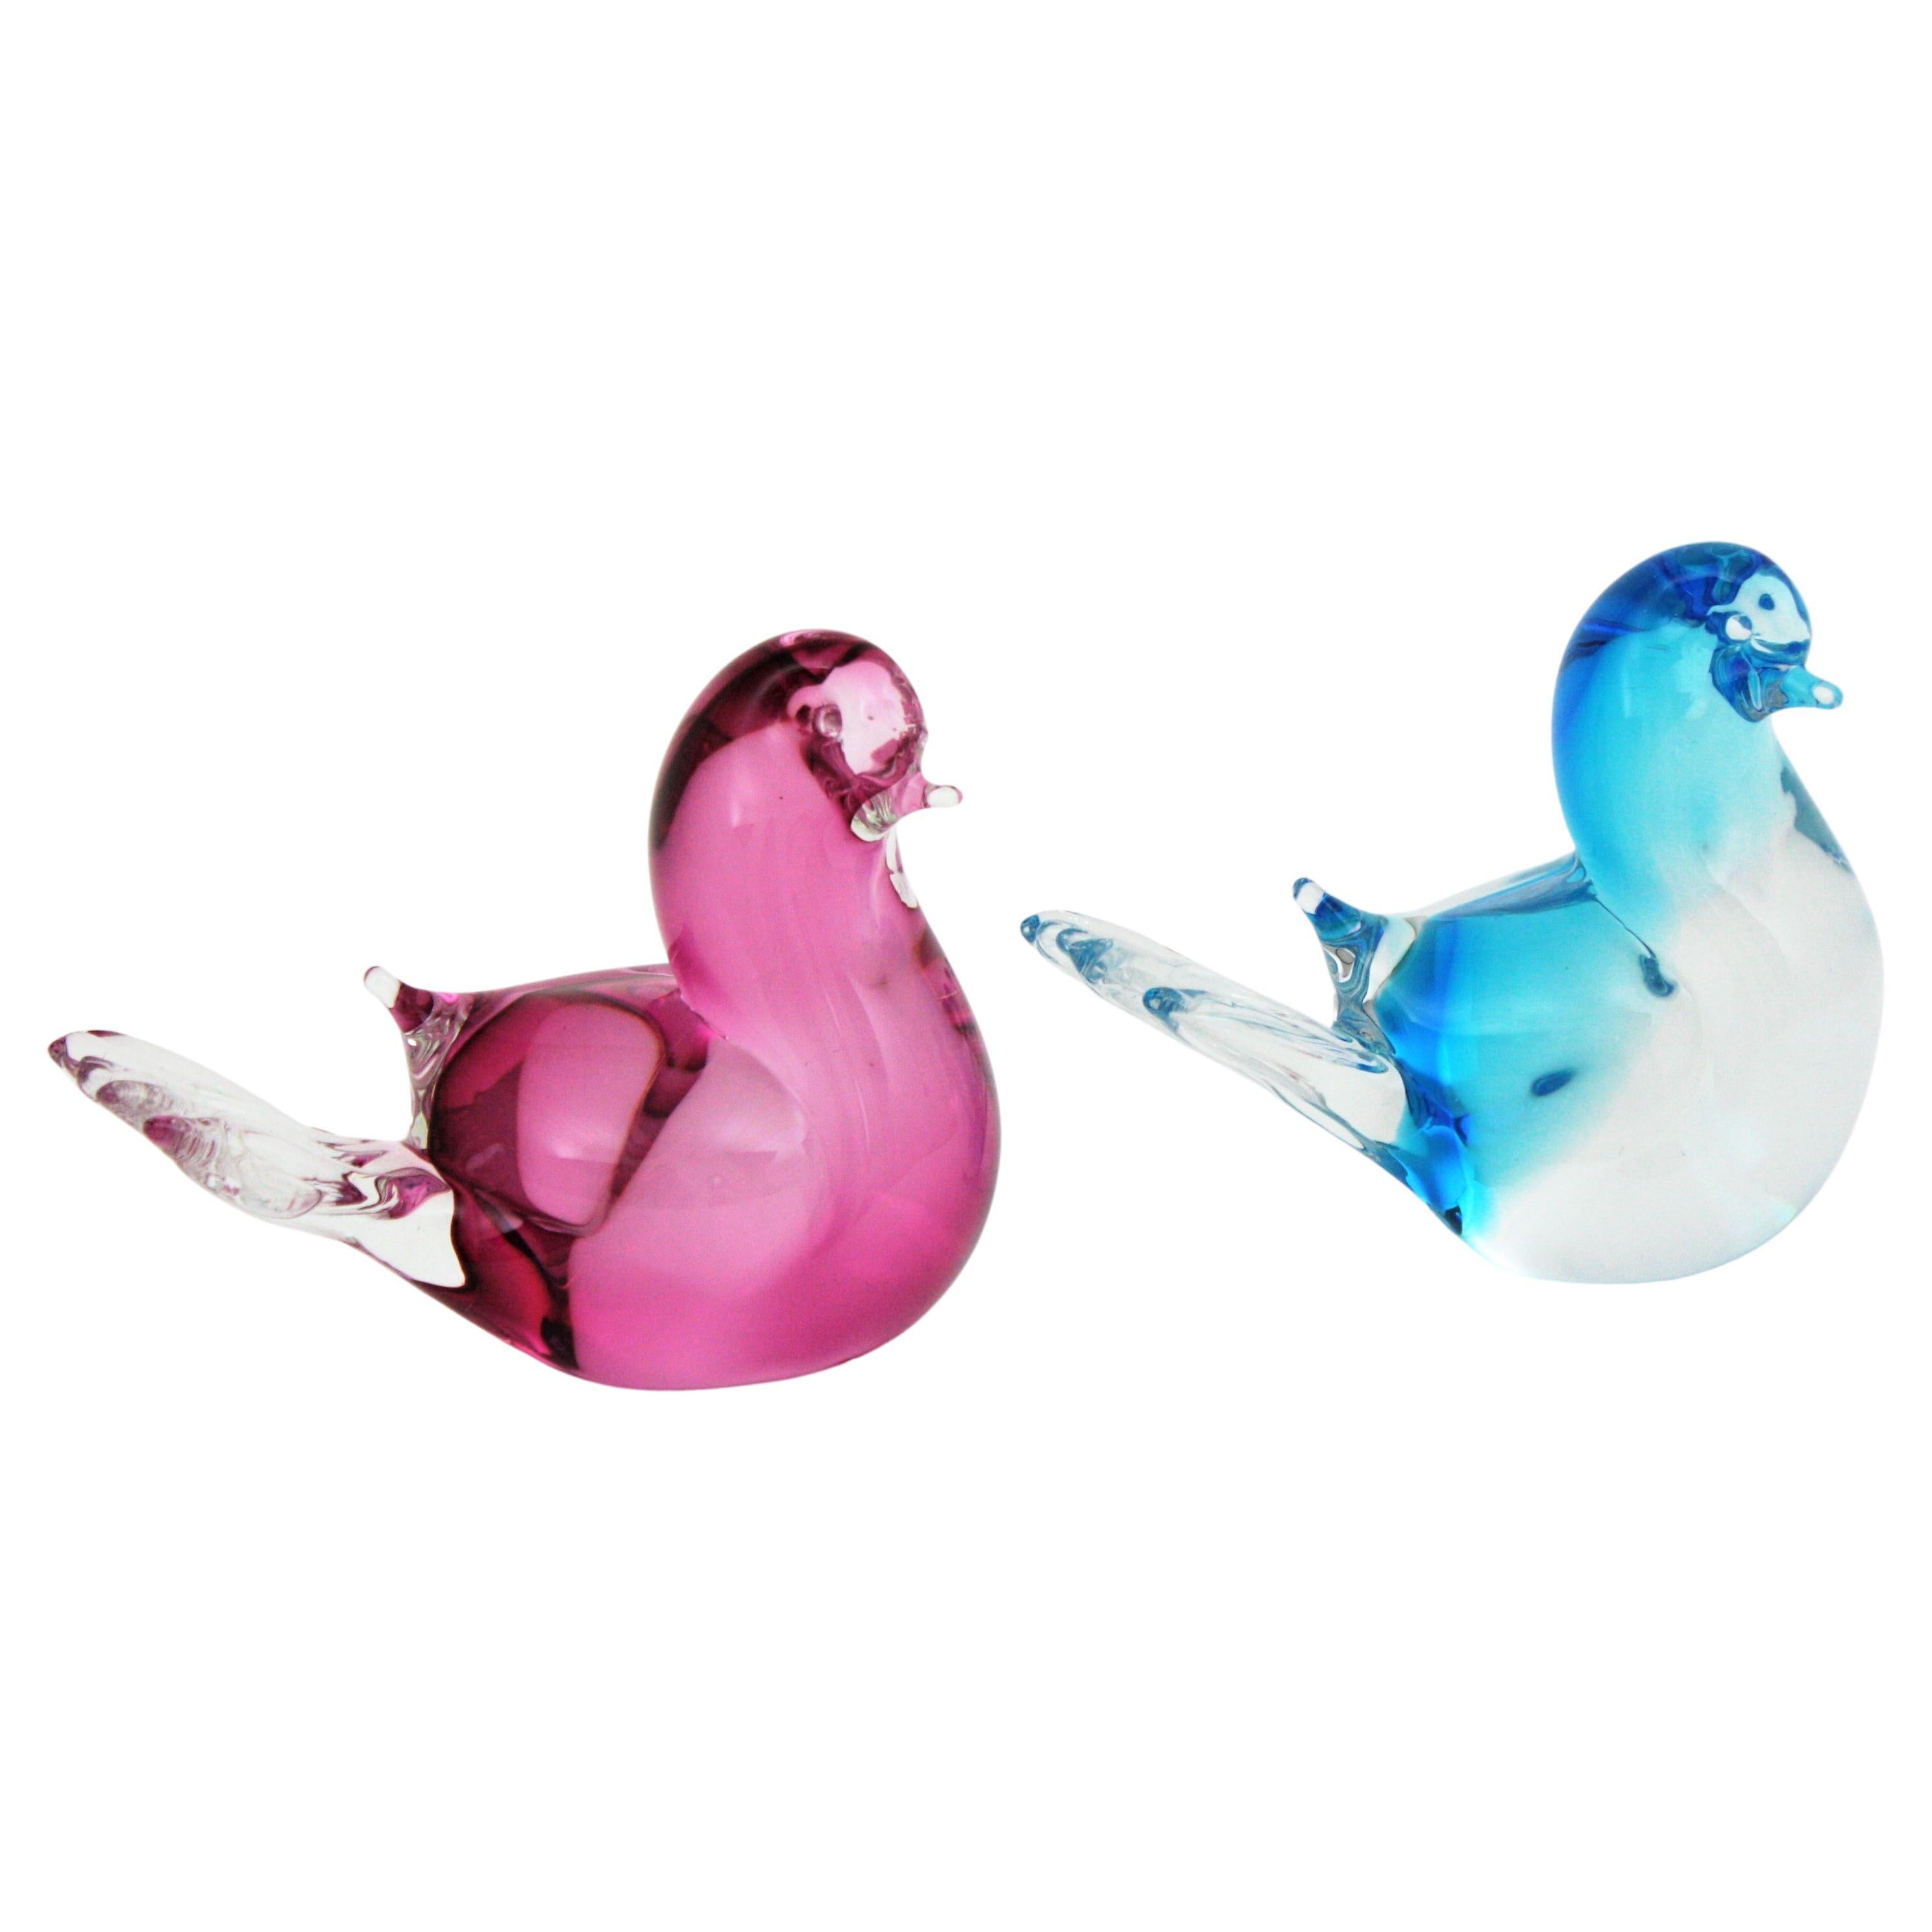 Eye-catching pair of Murano Sommerso Dove Bird figures in pink and blue glass. Attributed to Archimede Seguso, Italy, 1960s
Hanblown glass, Sommerso technique: One is made in pink glass summerged into clear glass and the other one is made in blue